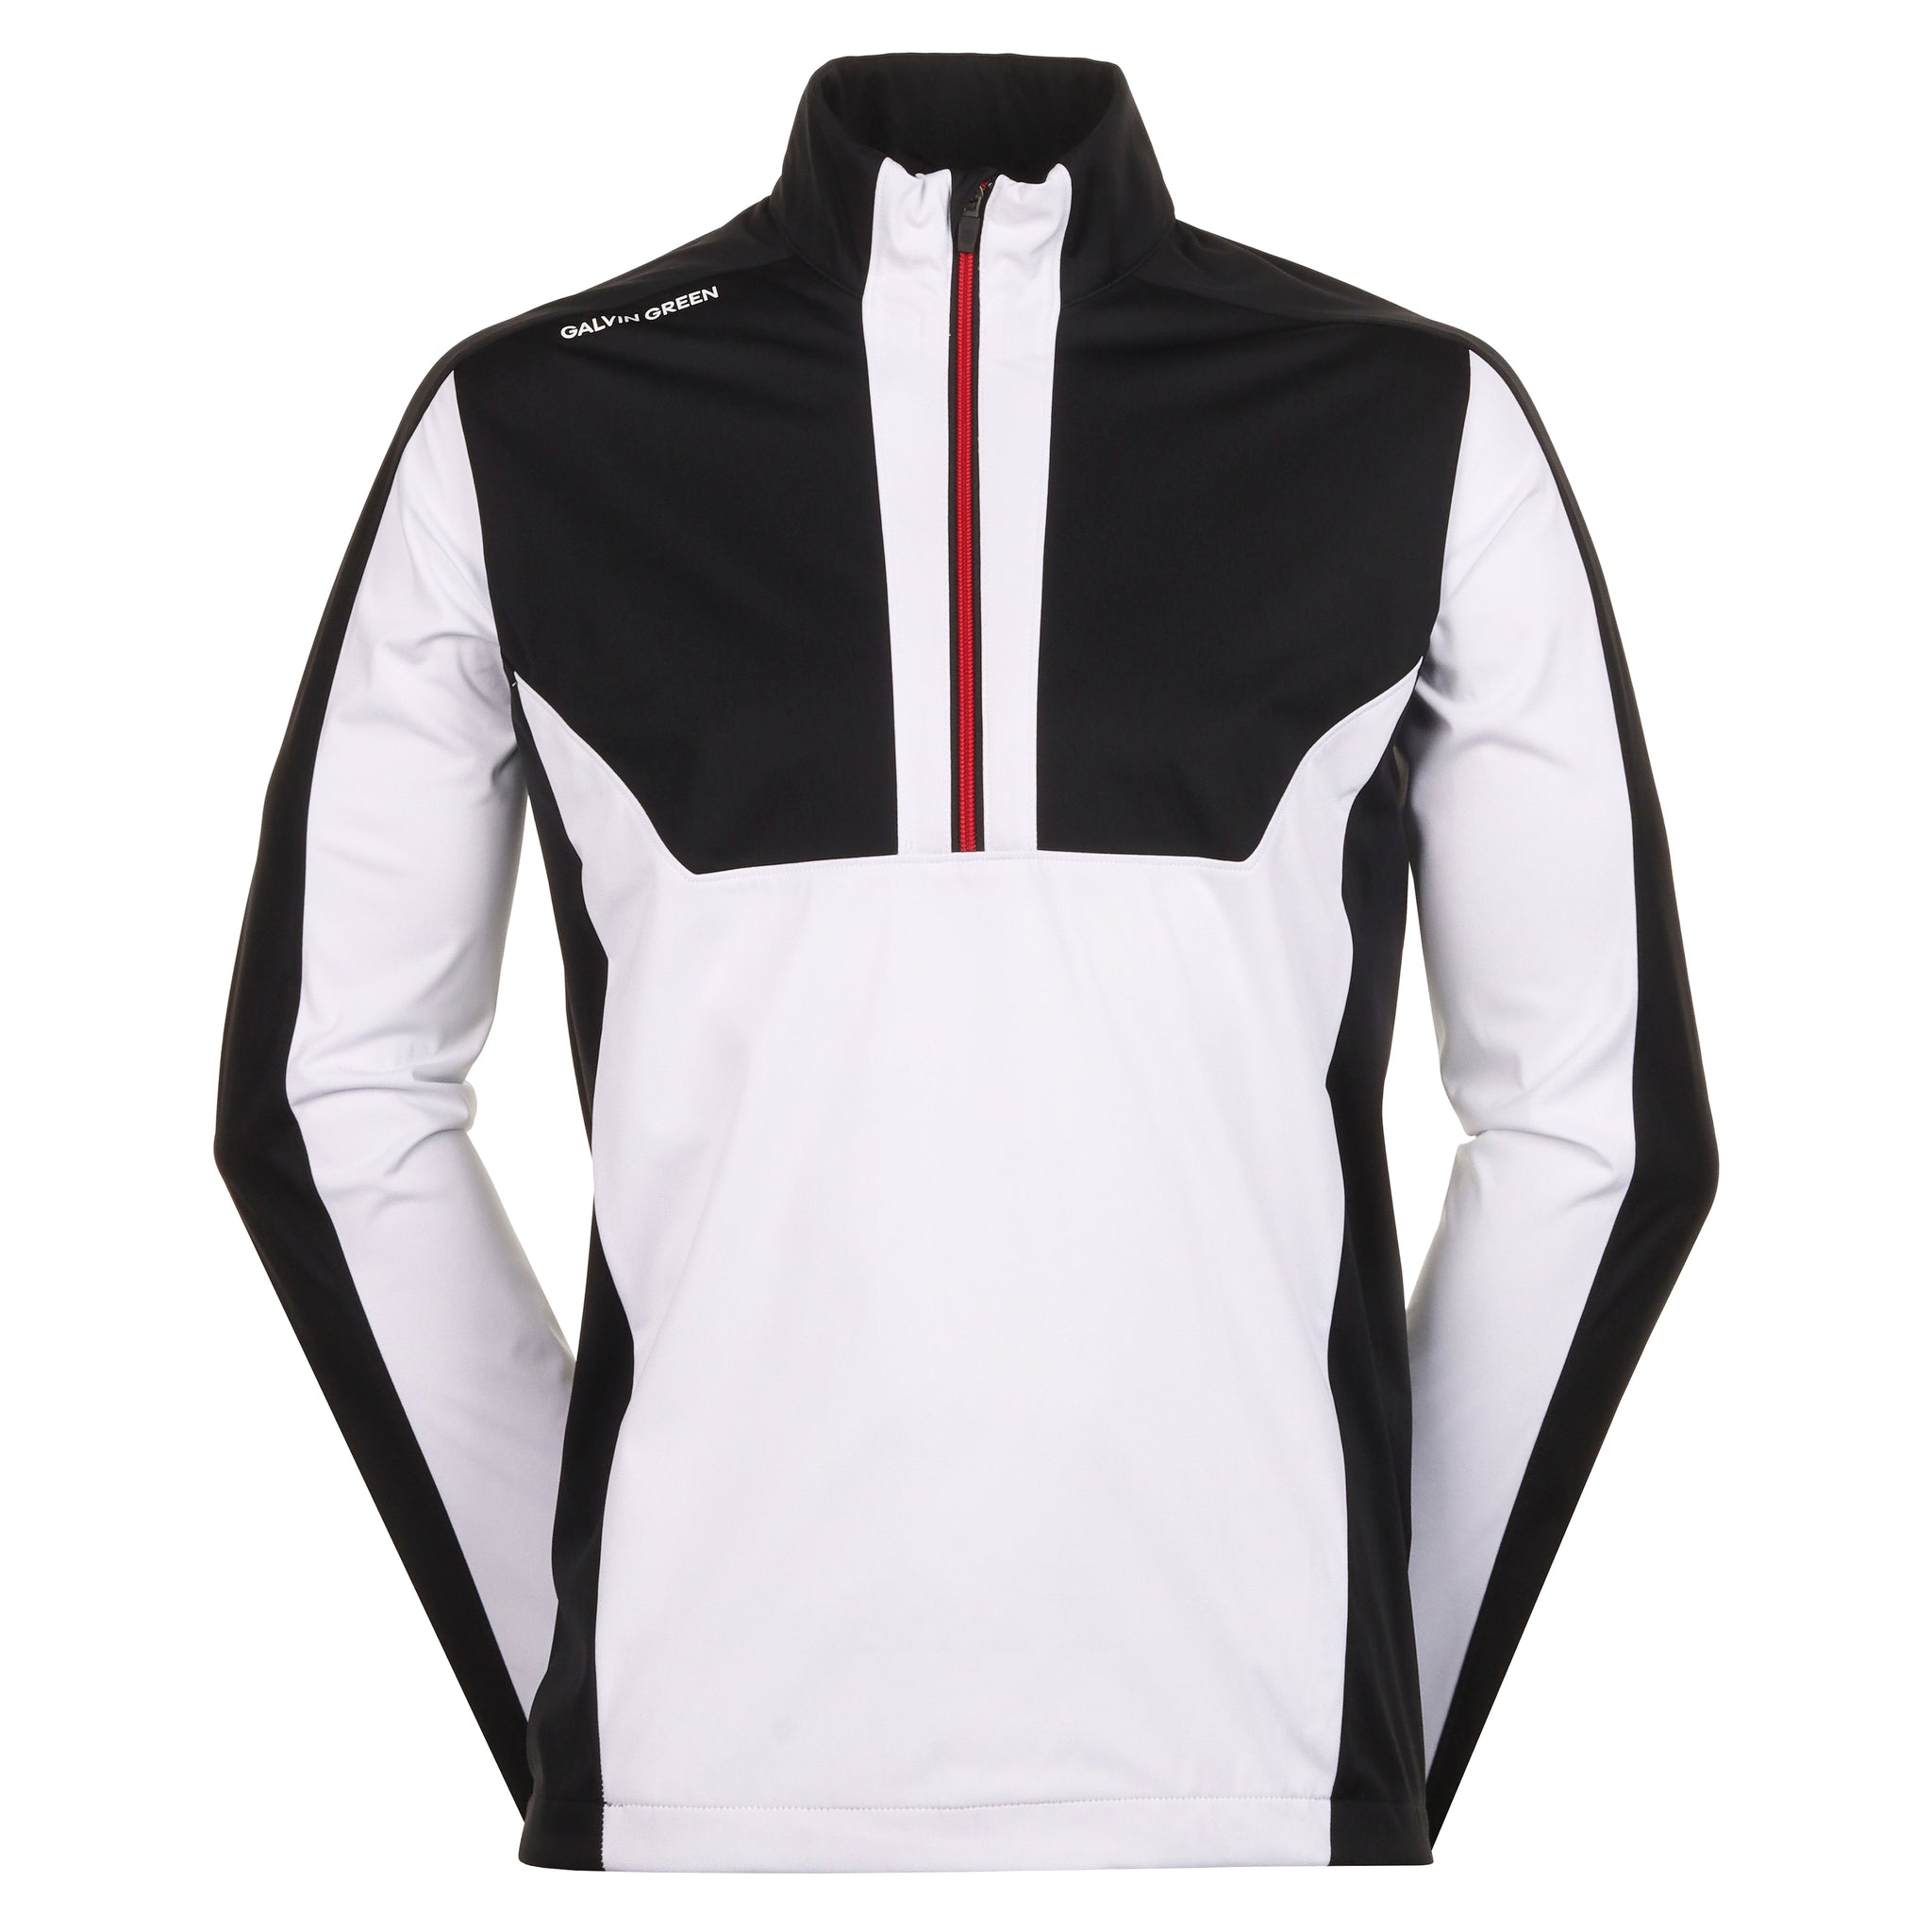 galvin-green-lawrence-interface-1-golf-jacket-white-black-red-9995